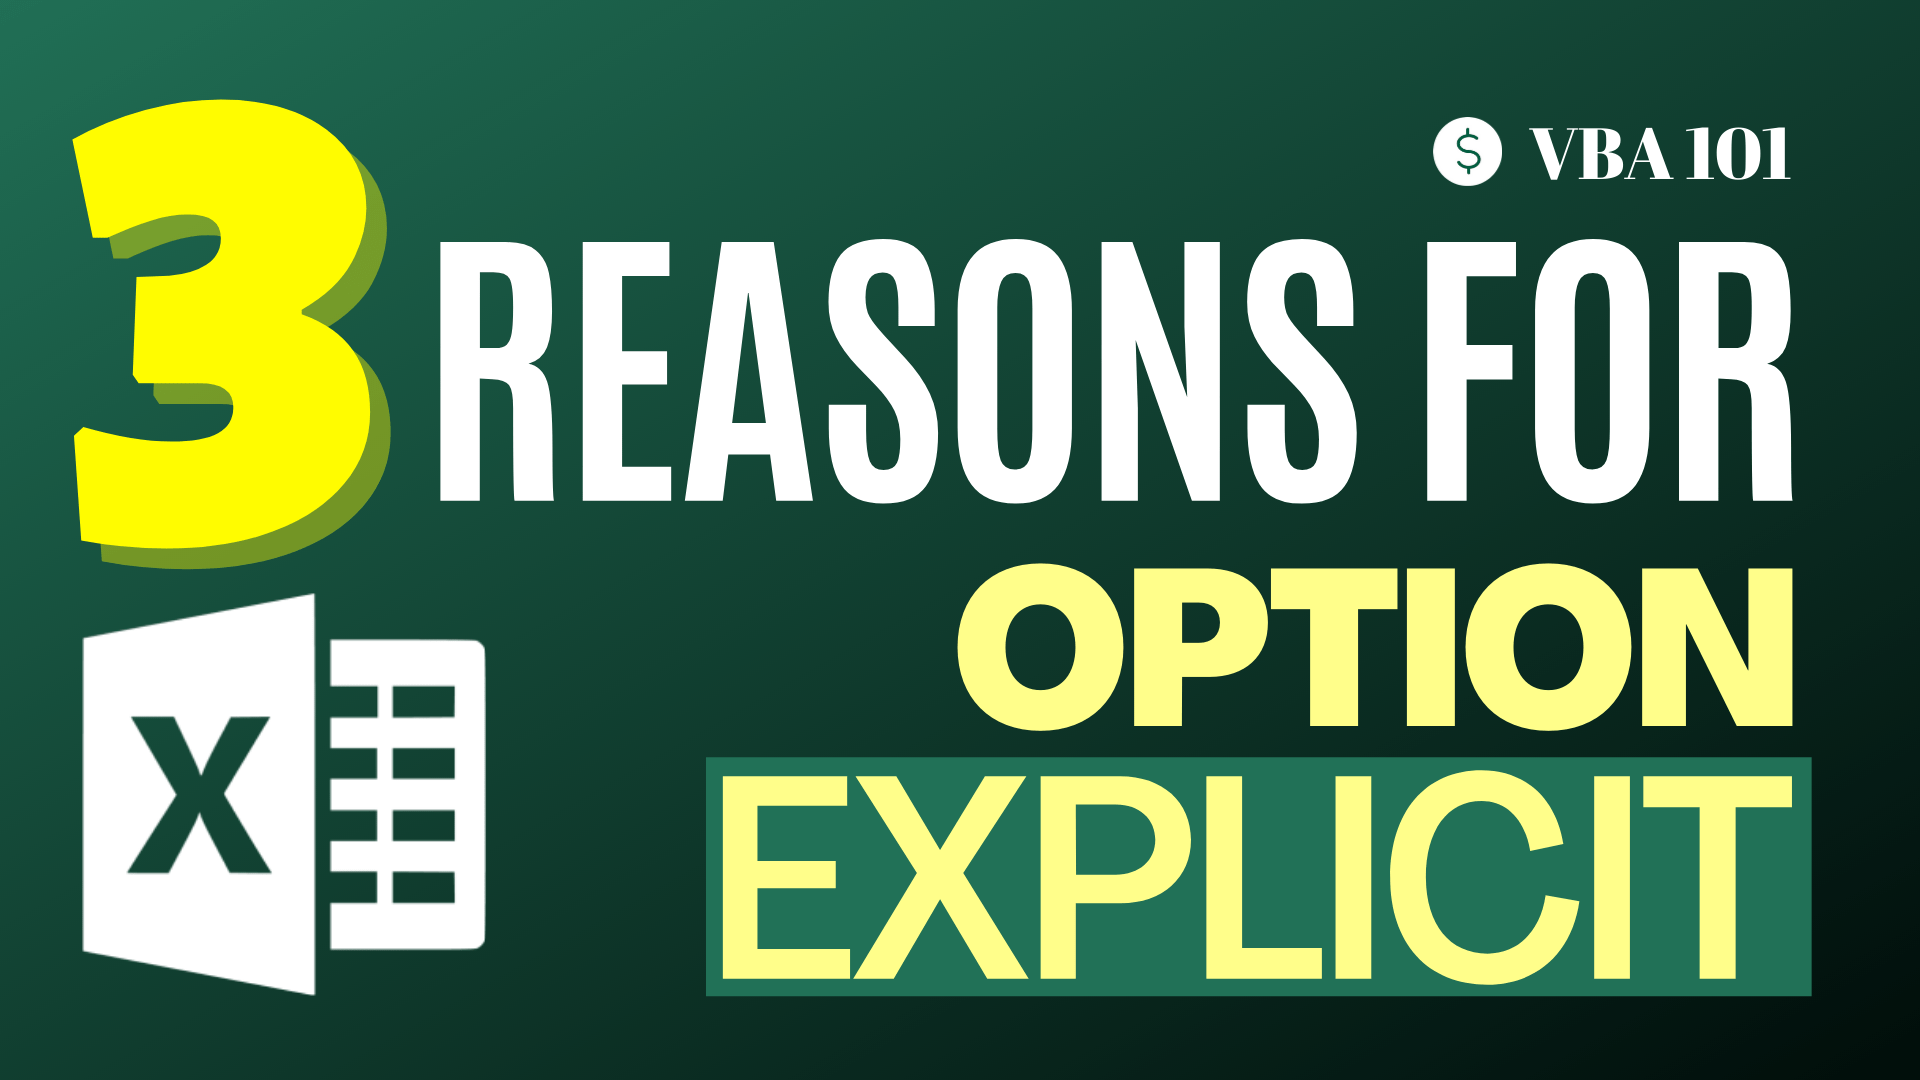 3 Reasons for Option Explicit (Excel VBA)